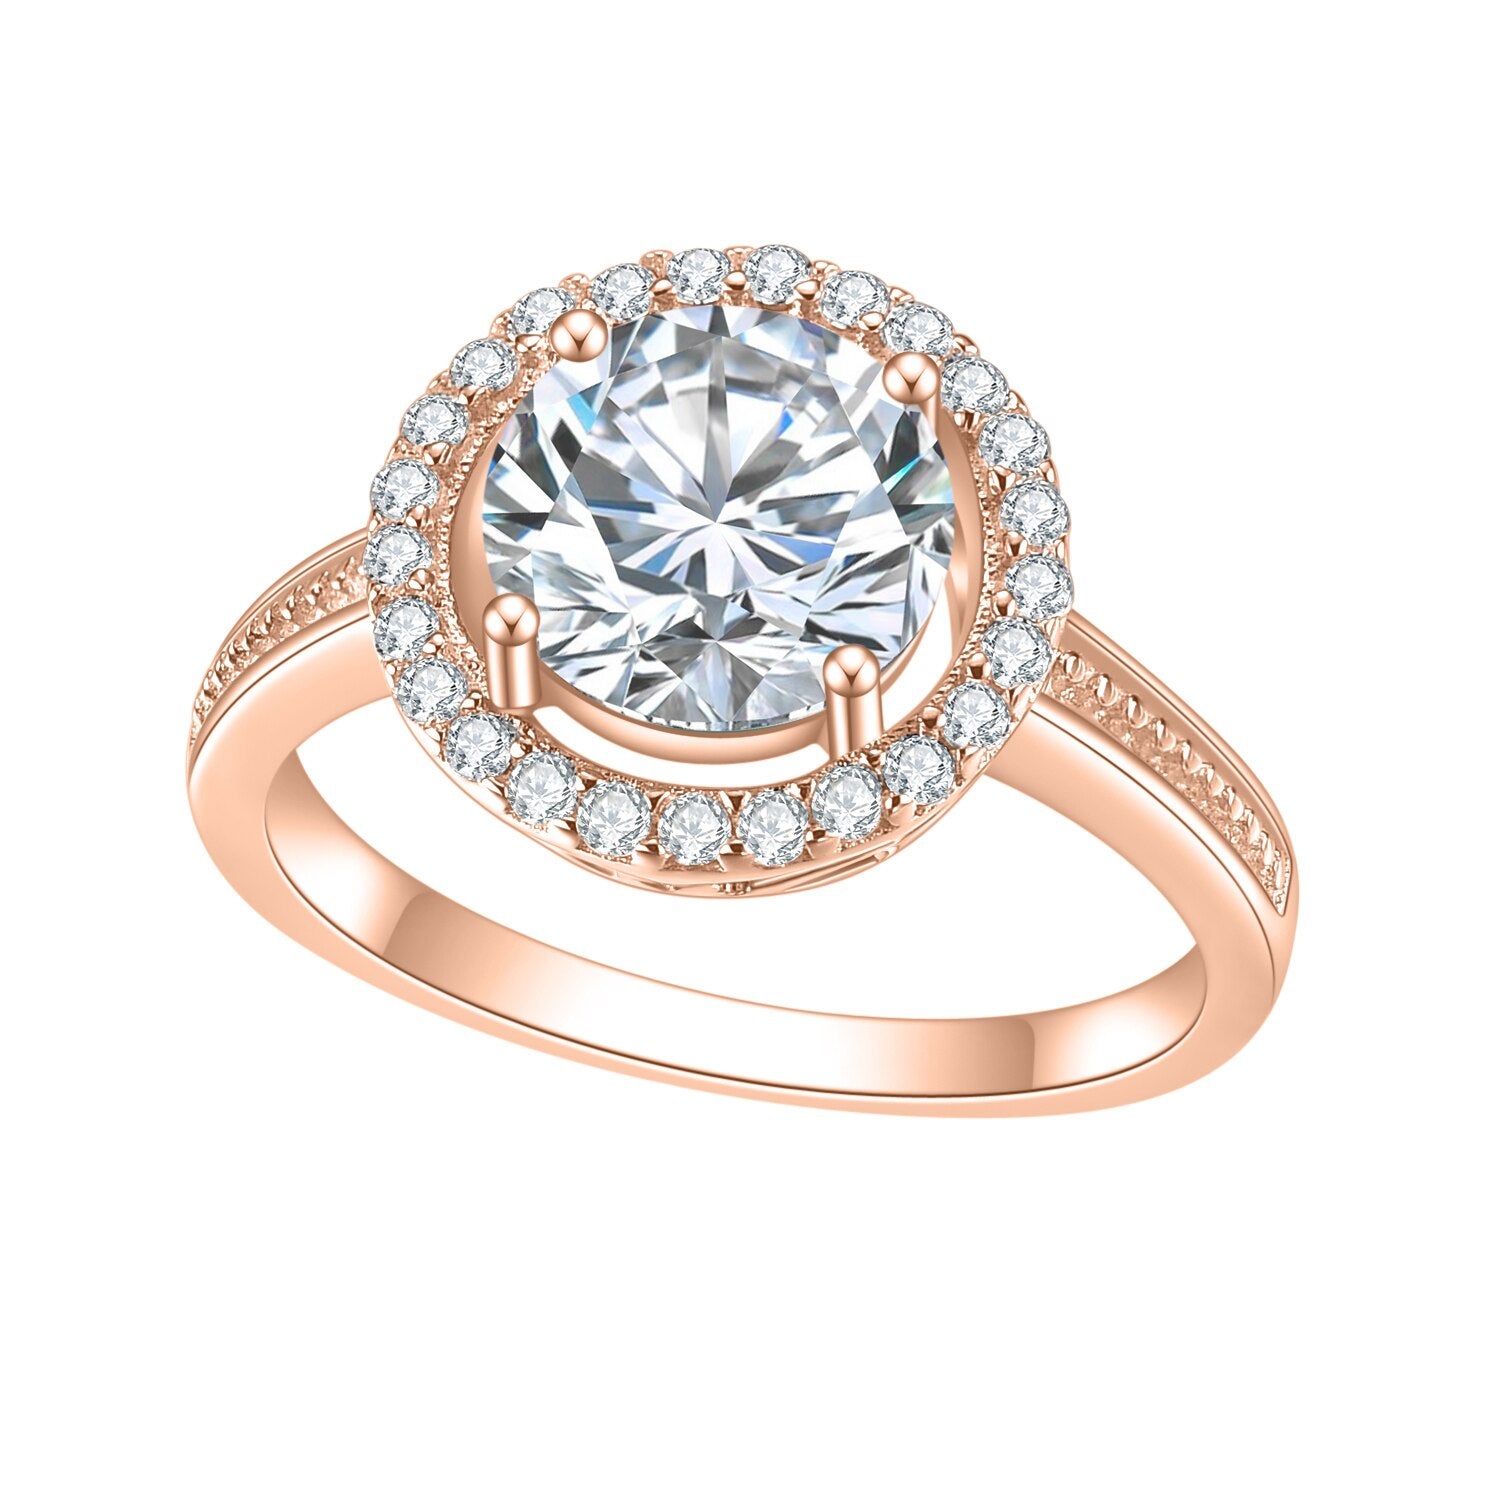 A rose gold halo ring set with a 2CT round moissanite encircled by a clear gem halo and set on a textured band.